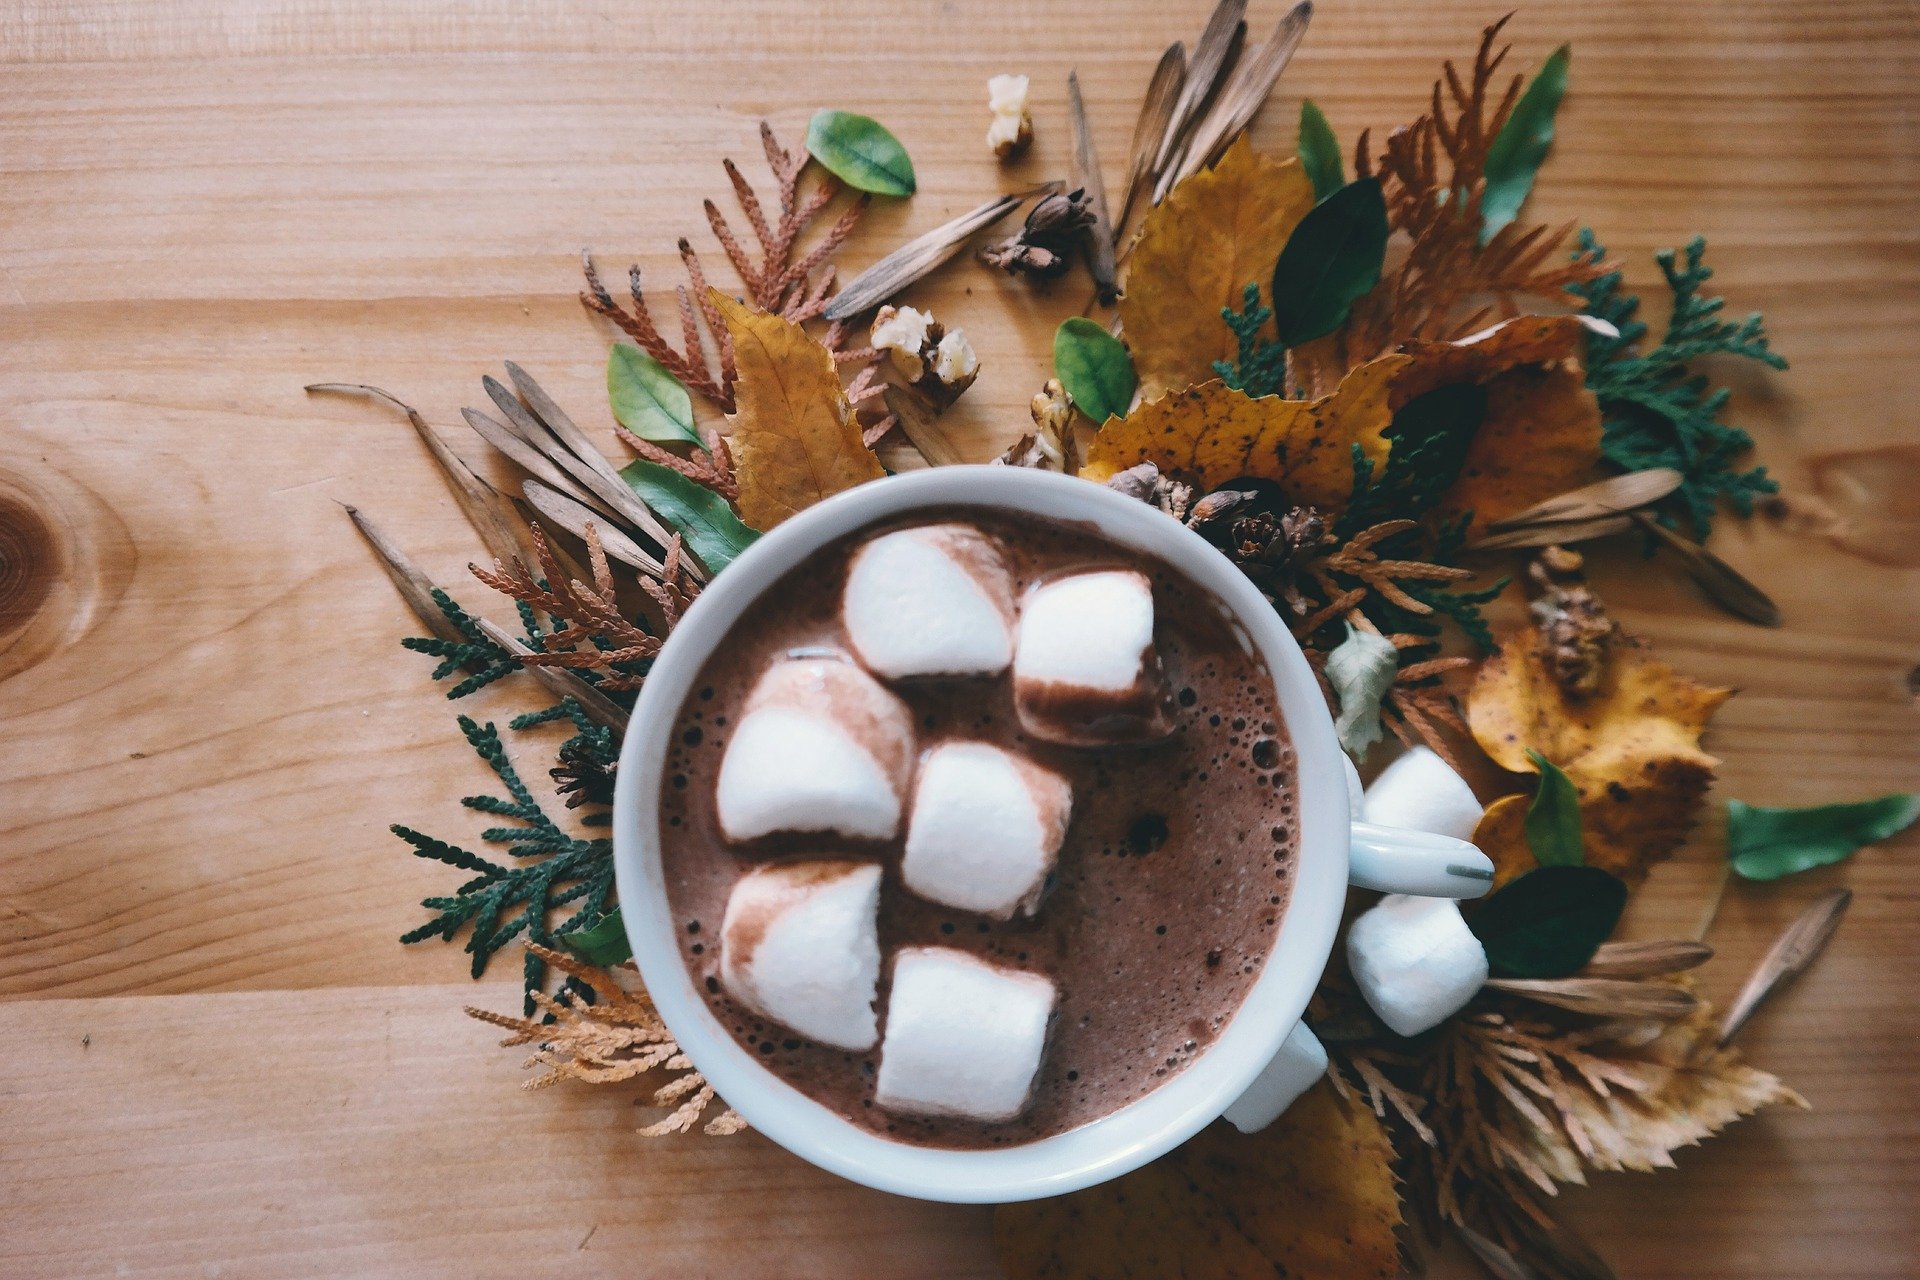 Alpine feeling at home with a Hot Chocolate